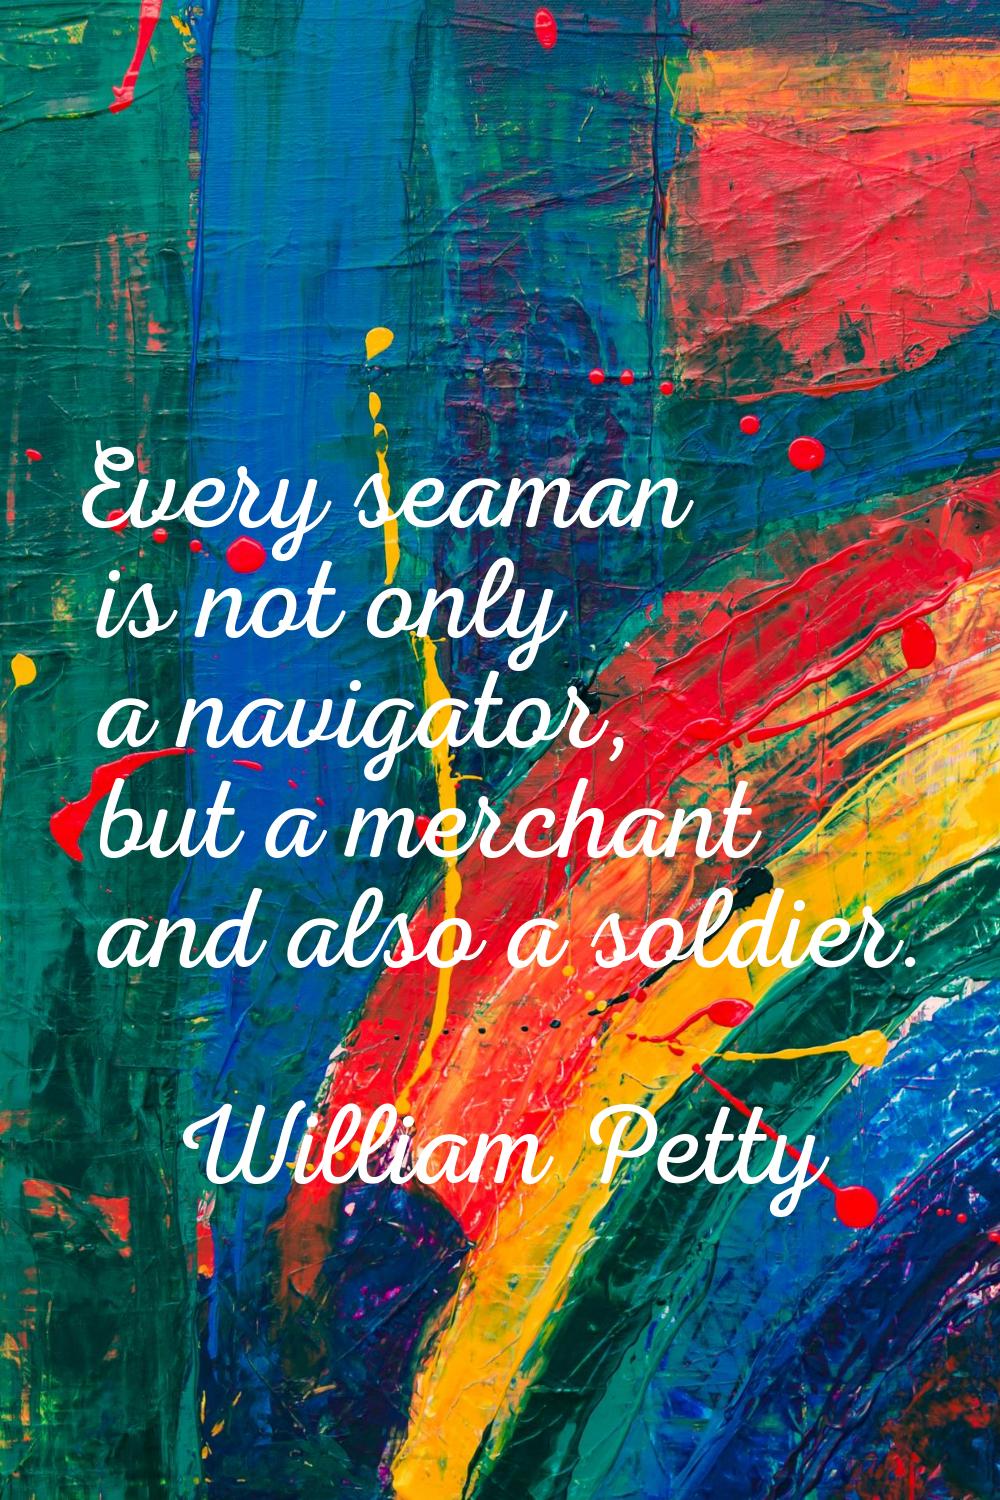 Every seaman is not only a navigator, but a merchant and also a soldier.